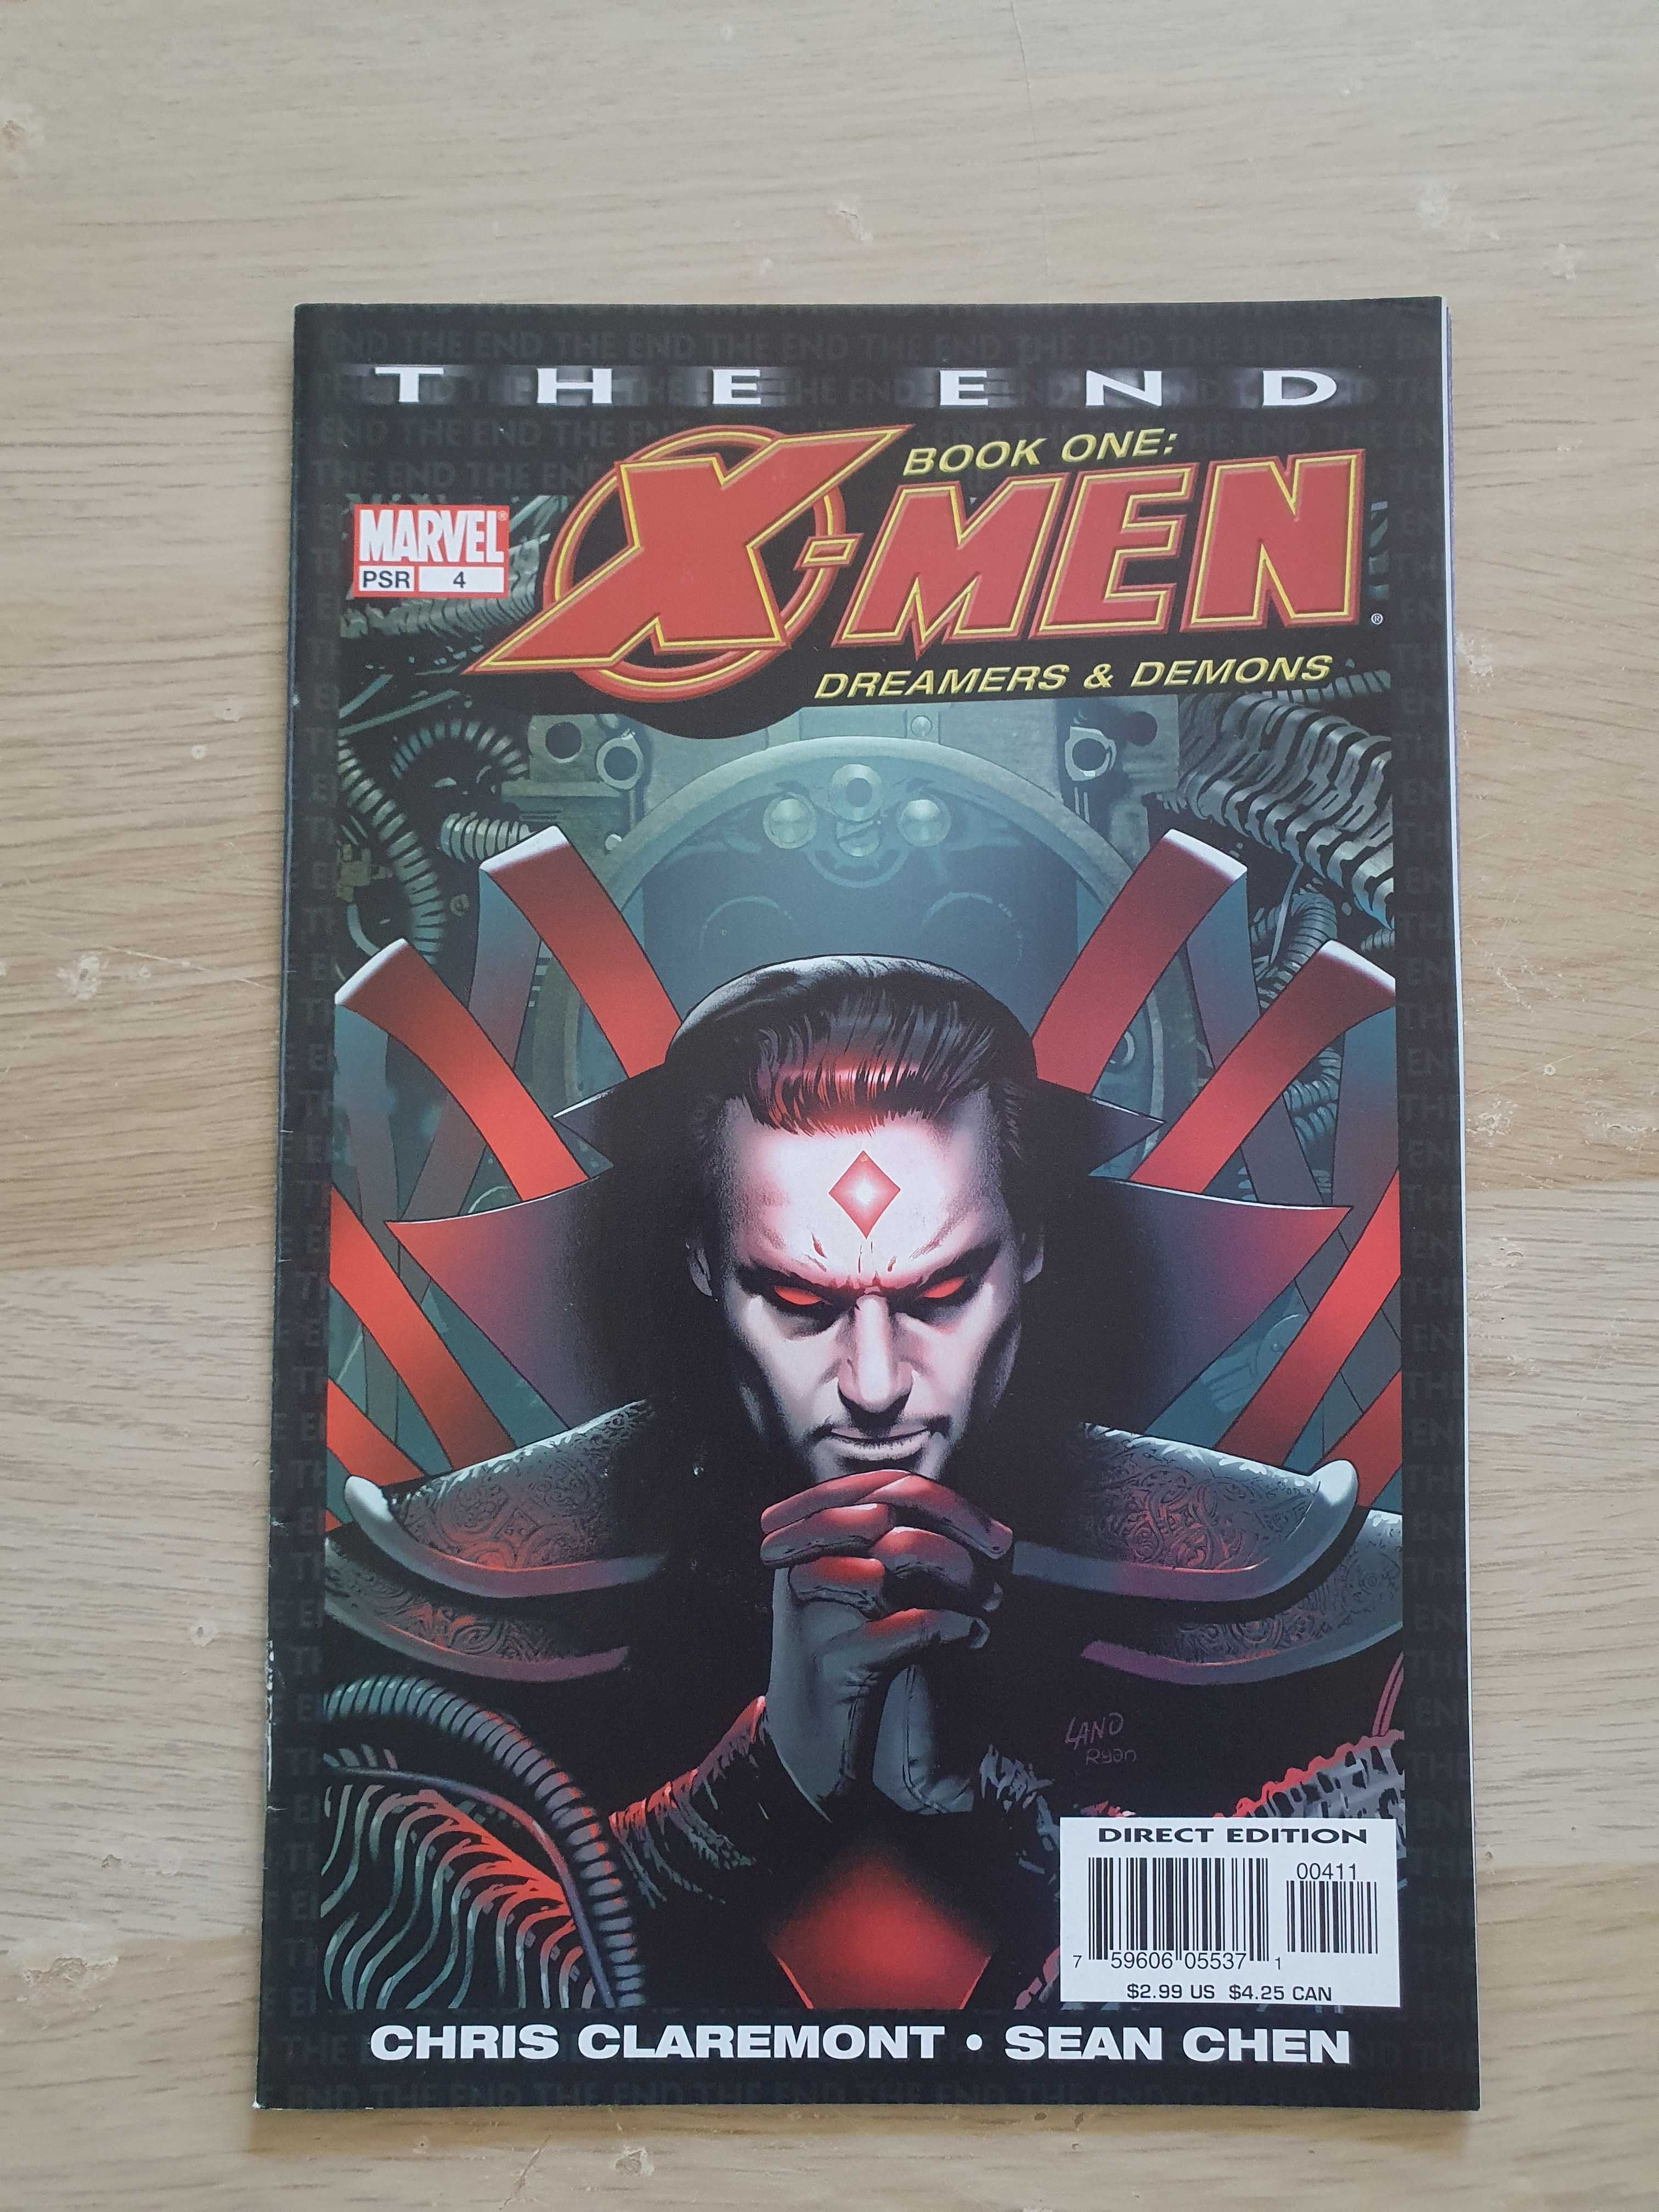 X-men: The End: Book one: Dreamers and Demons: 1-6 (2004) (ZM63)